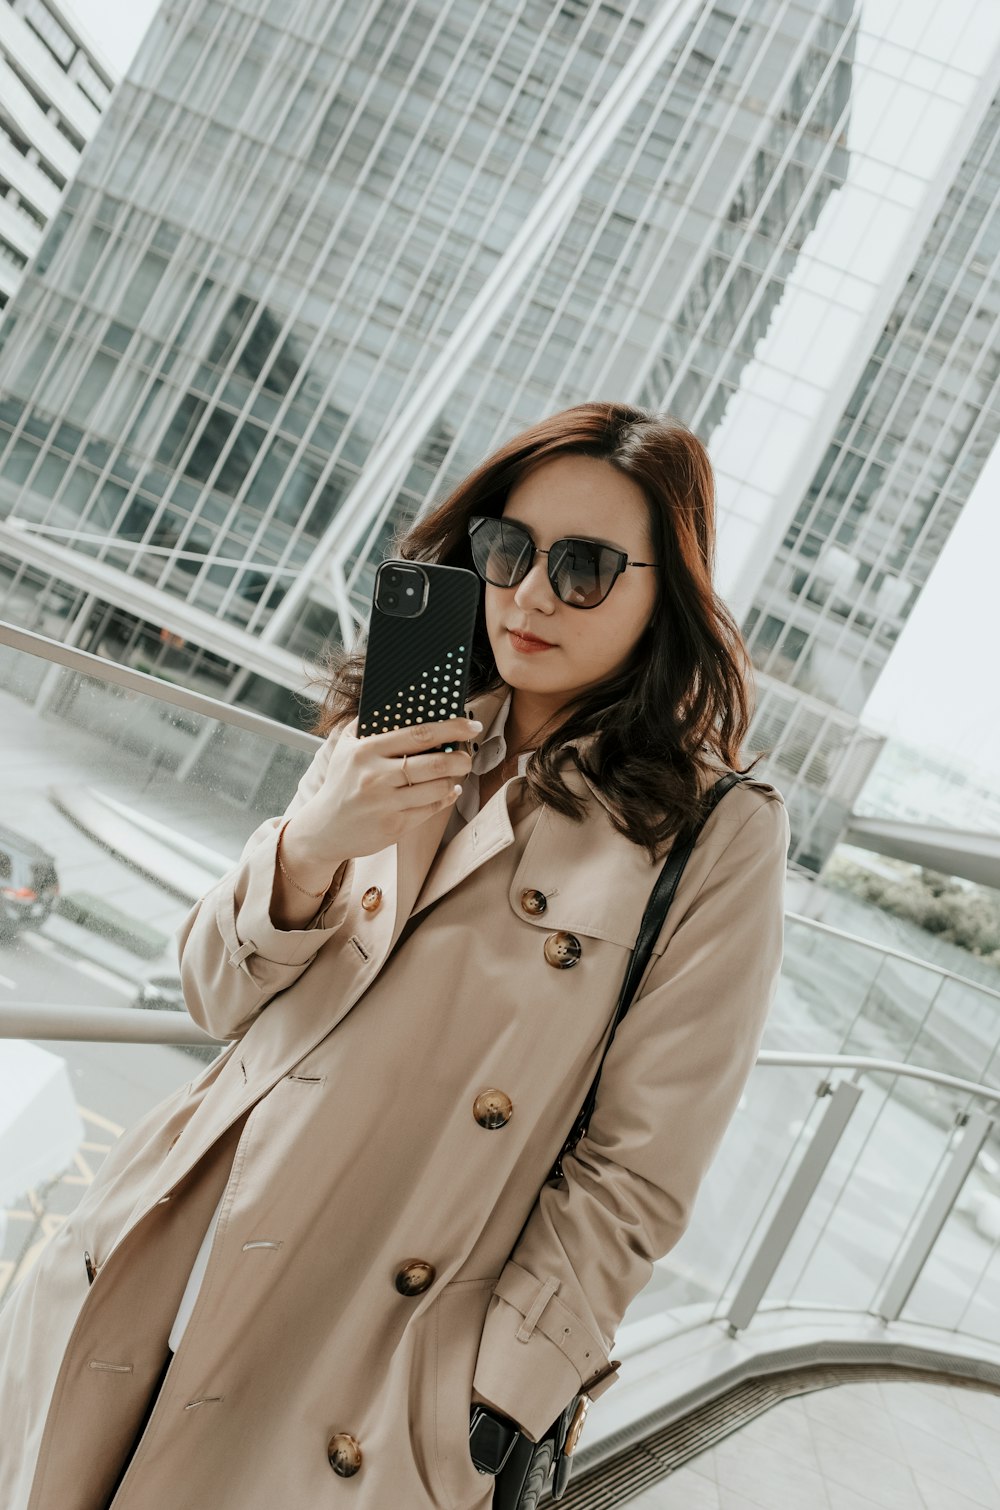 A woman in a trench coat holding a cell phone photo – Free Portrait  photography Image on Unsplash